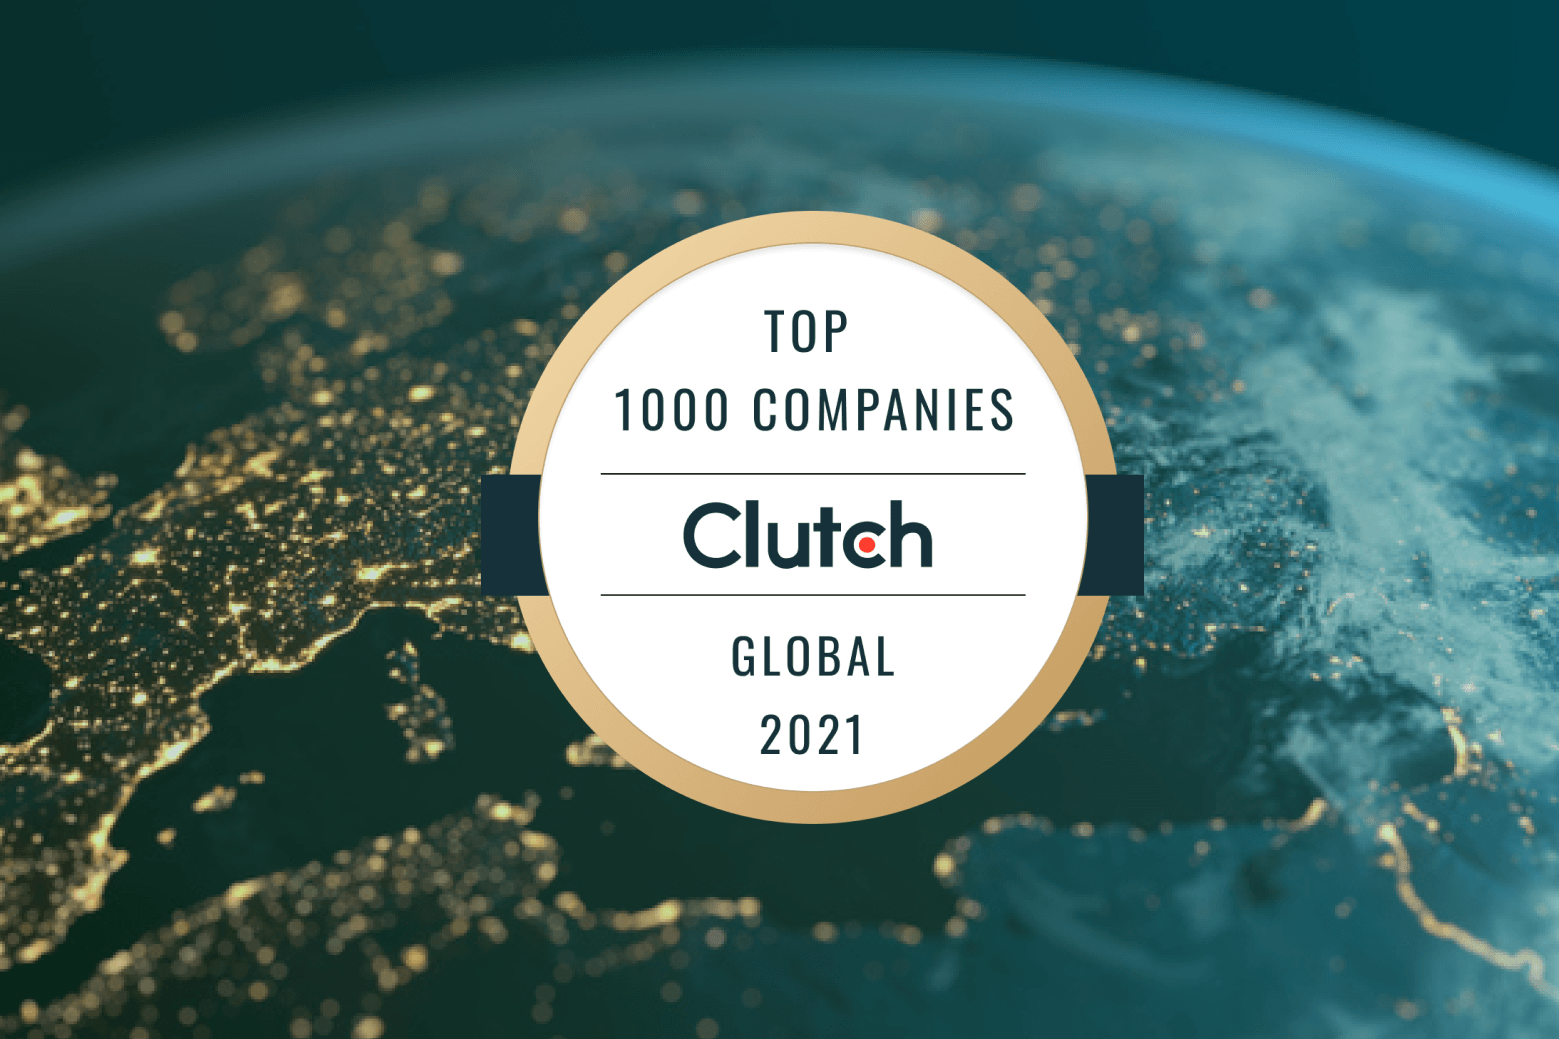 Sibedge Named among the Top 1000 B2B Companies during Clutch’s 2021 Global Awards